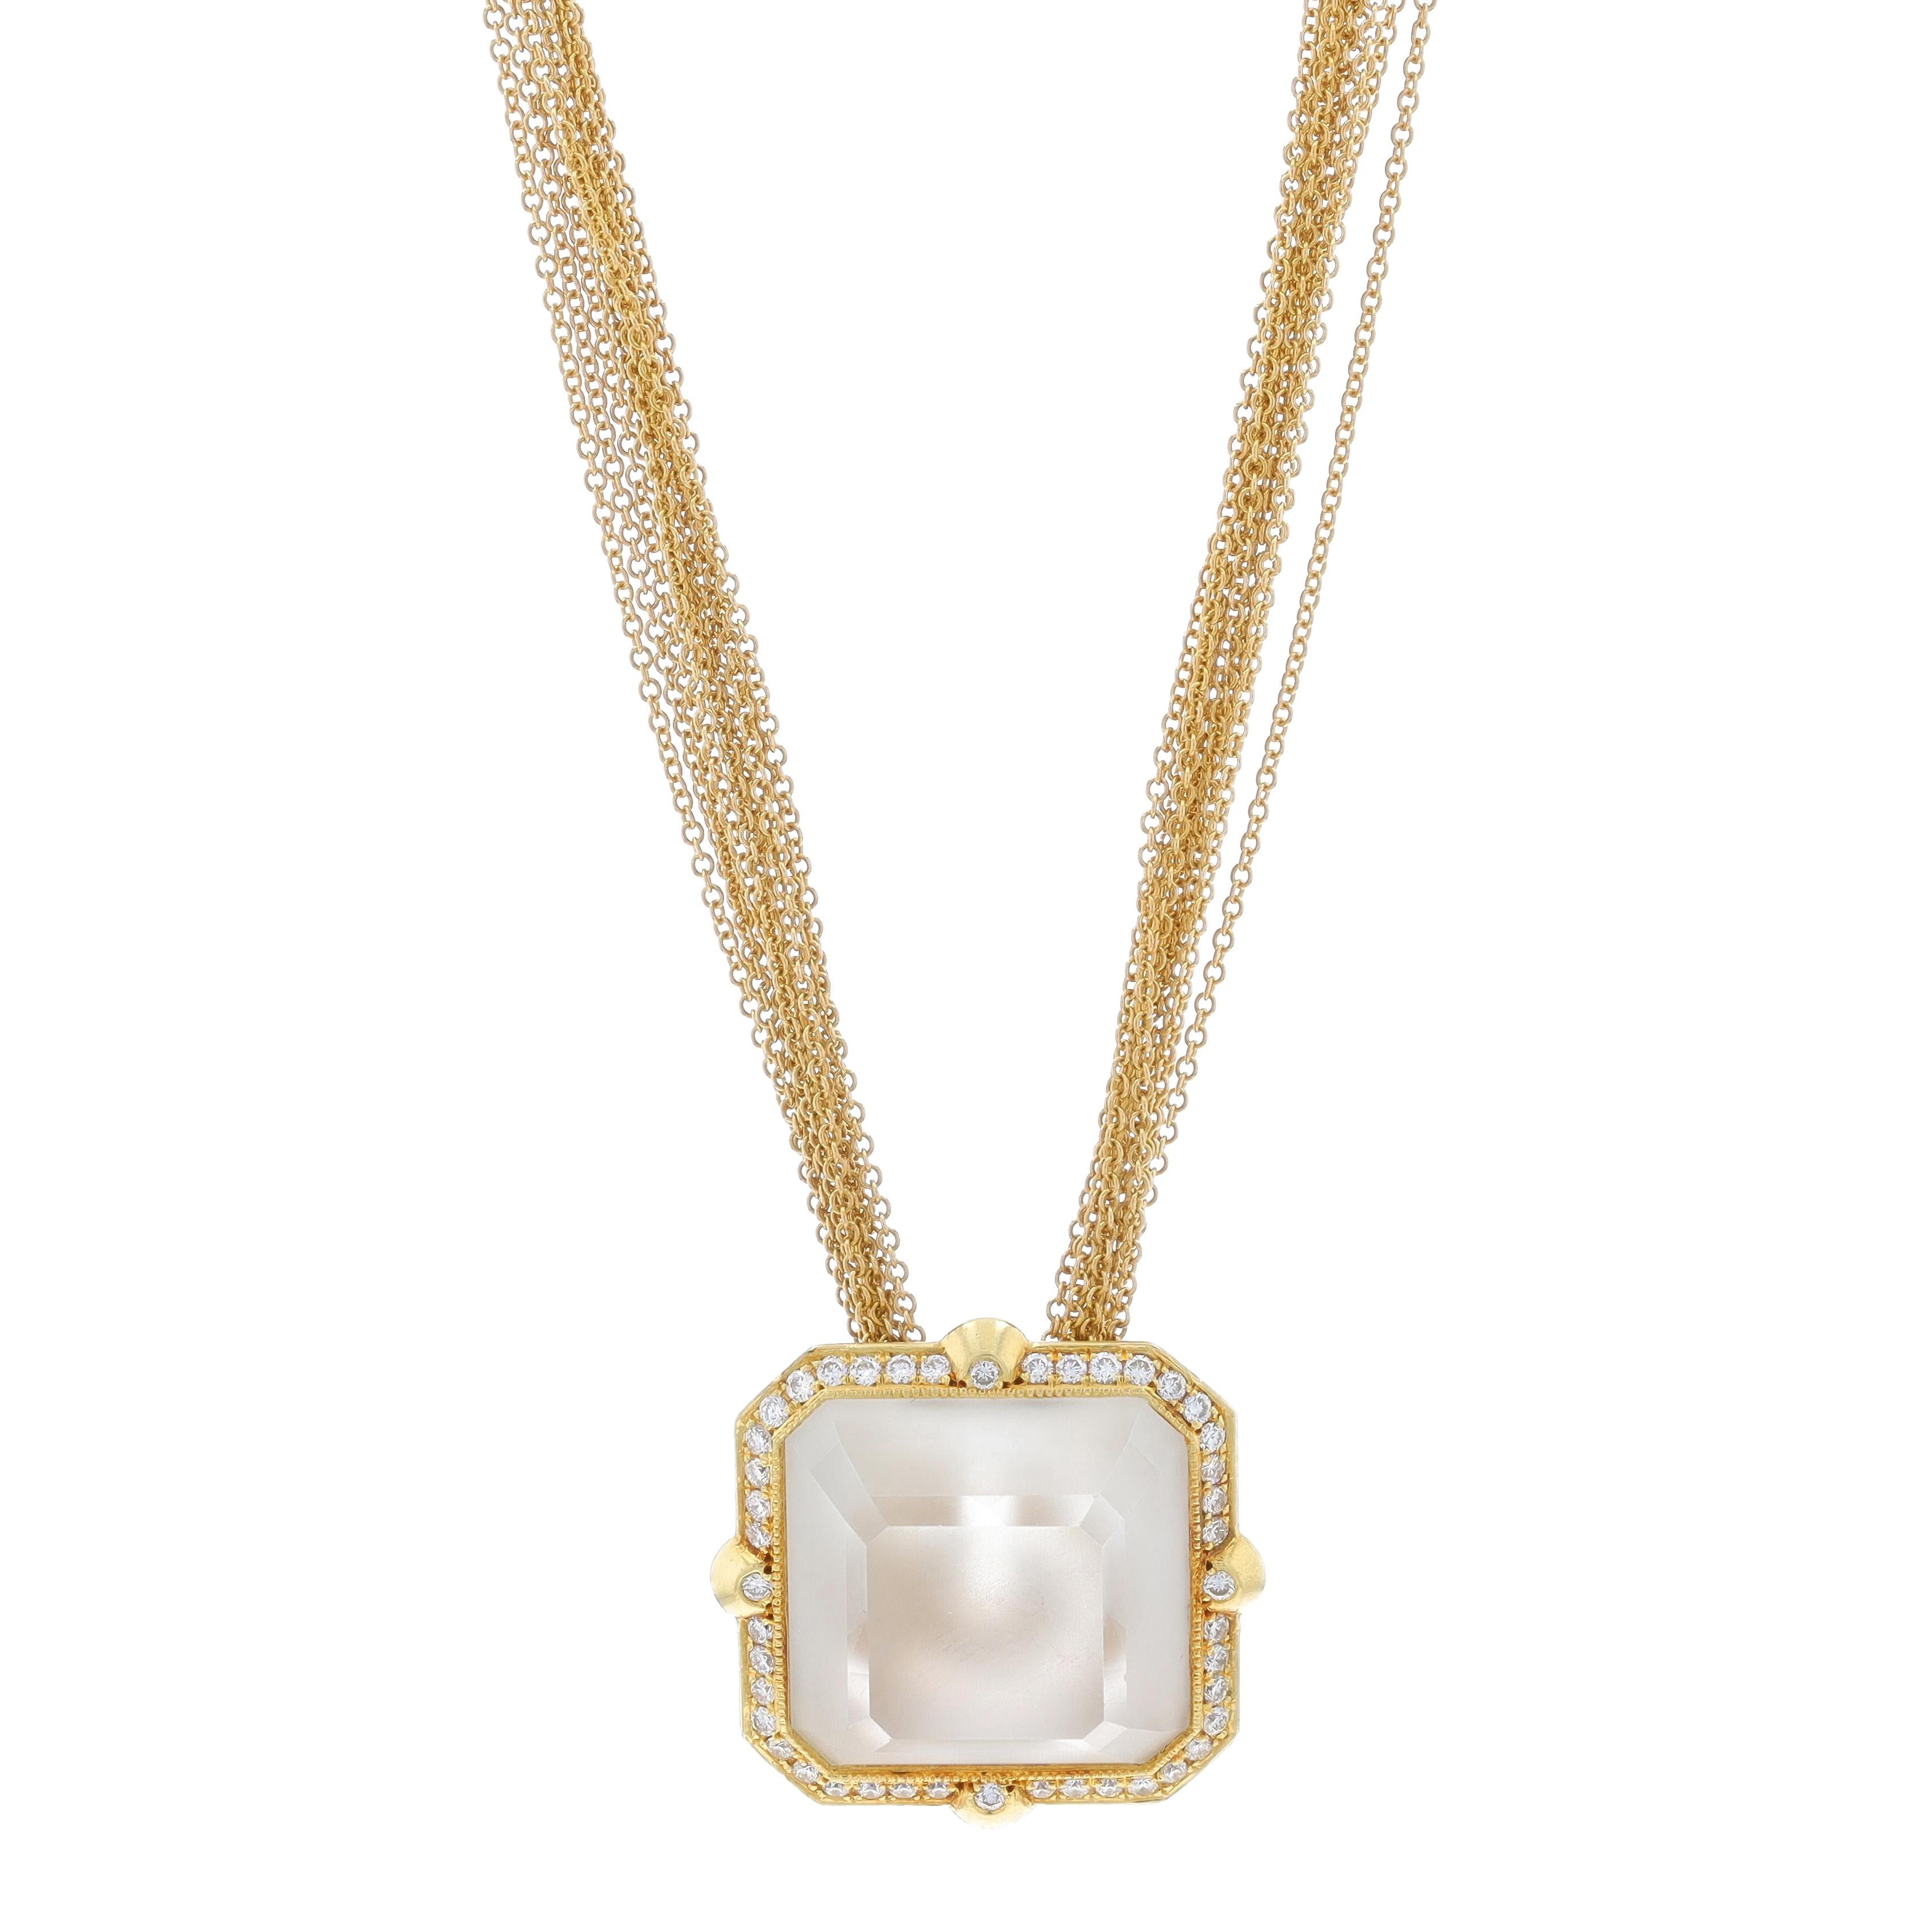 Metal Content: 14k Yellow Gold (chain) & 18k Yellow Gold (pendant)

Stone Information

Natural Quartz
Carat(s): 21.28ct
Cut: Square Step
Color: Colorless
Stone Note: Matte Finished with Polished Table

Natural Diamonds
Carat(s): .60ctw
Cut: Round